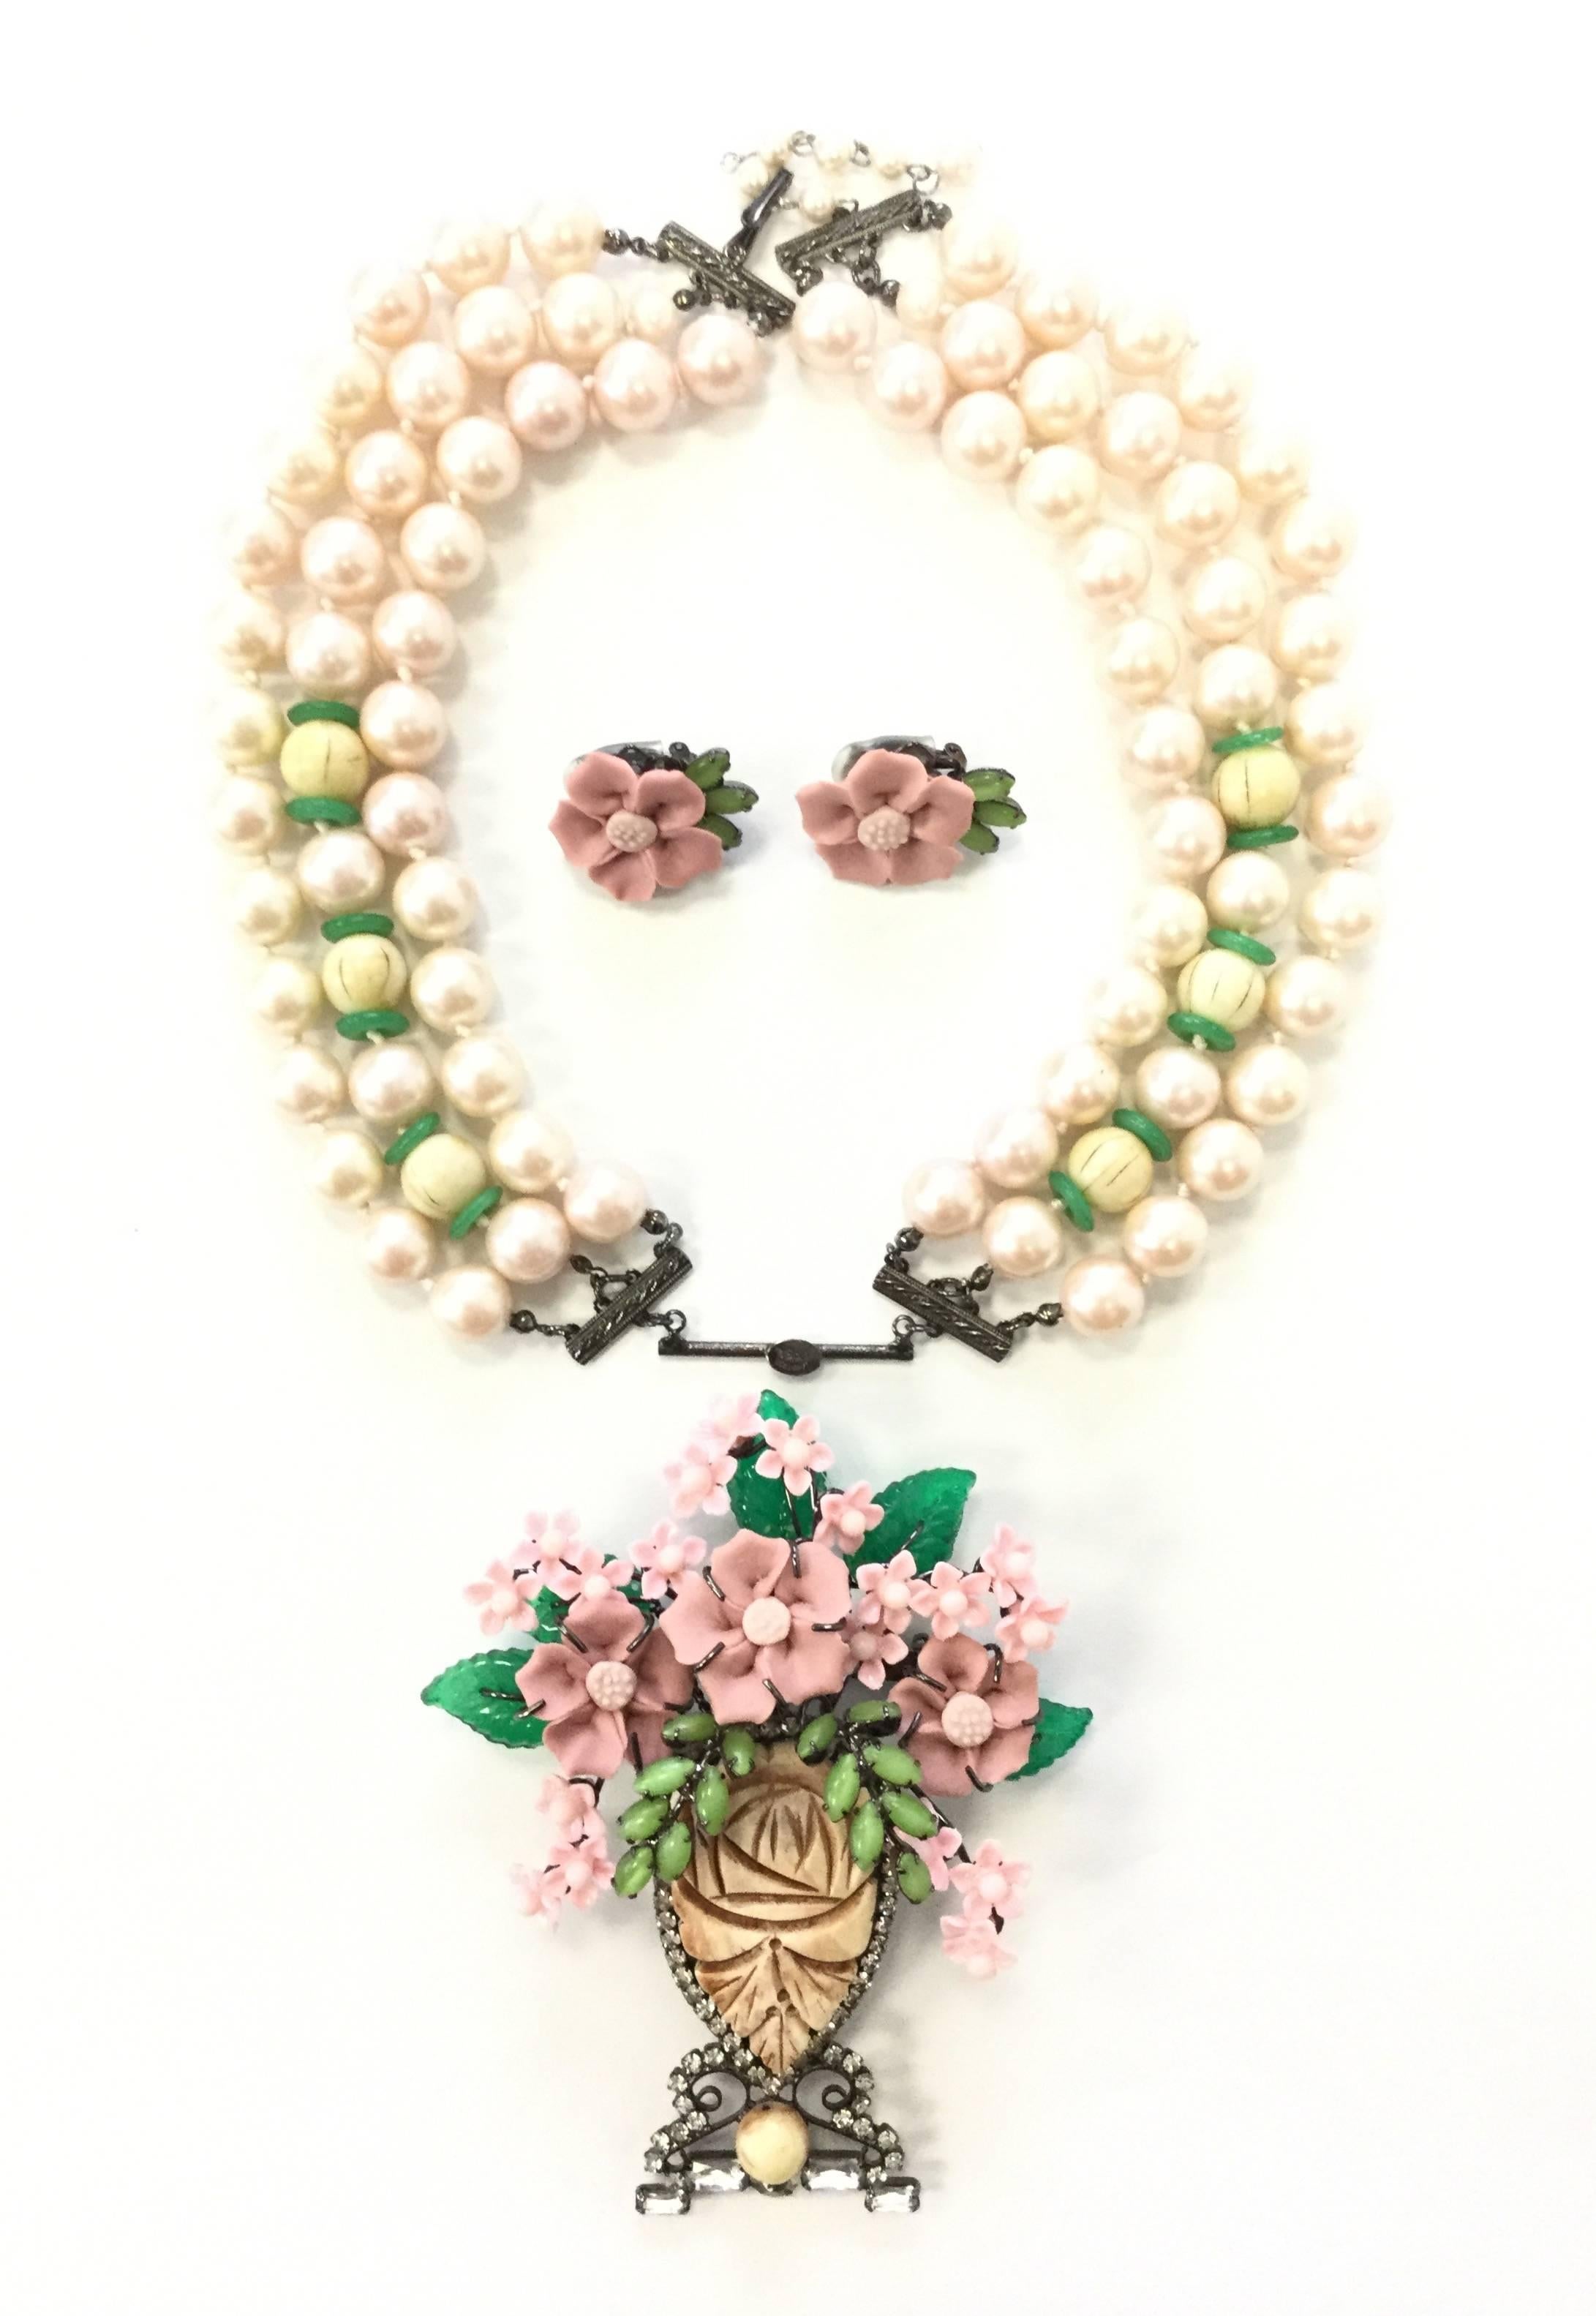 Fabulous Polynesian-inspired jewelry set by Larry Vrba! This set features a collar-length necklace composed of faux pearls and carved seed beads with green spacer beads. The necklace pendant is an impressive floral bouquet composed of glass